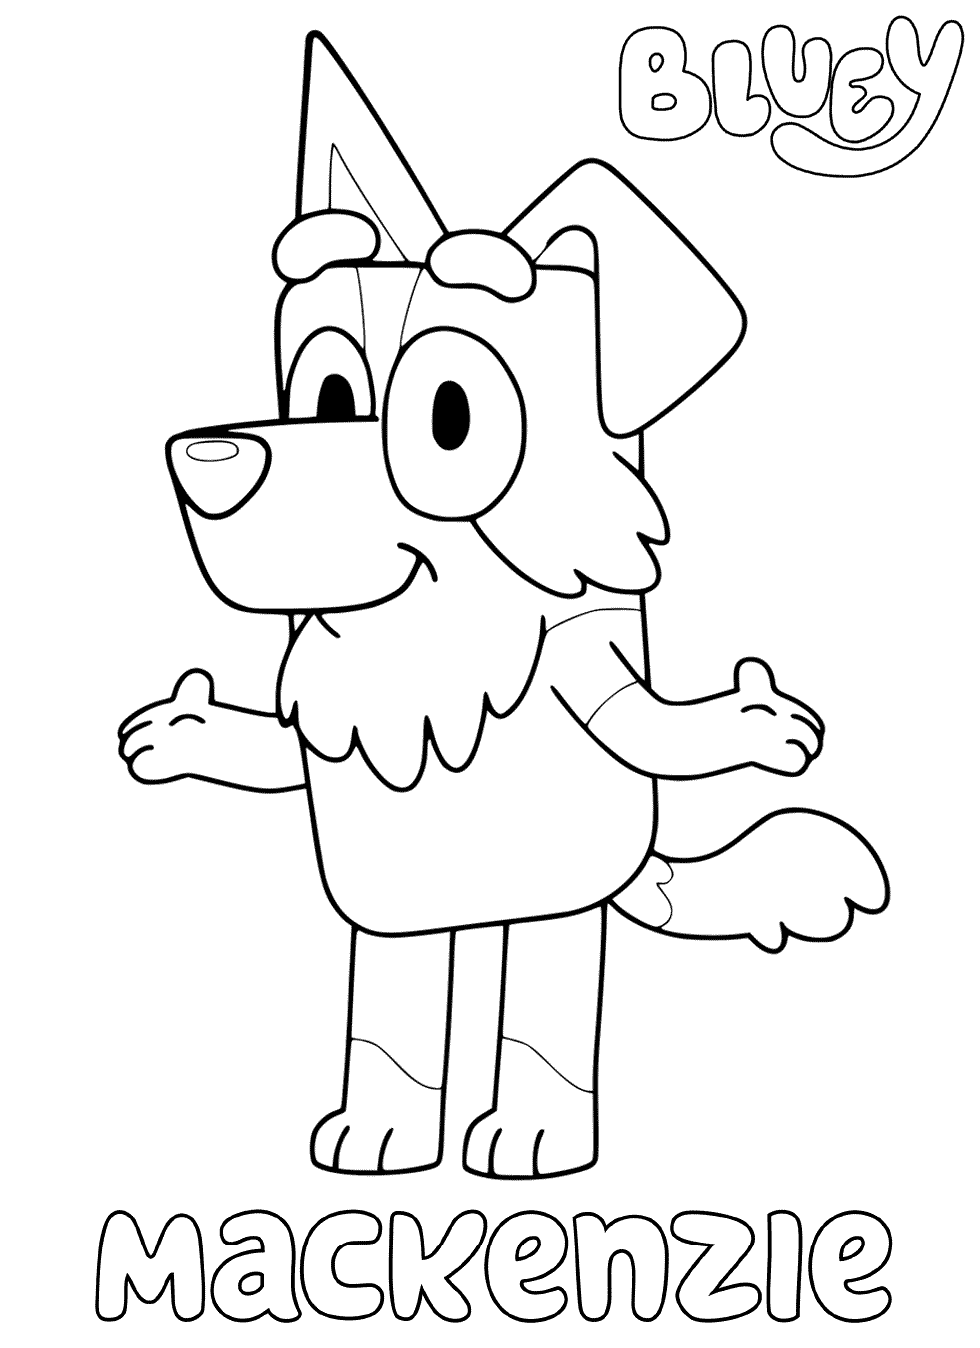 Mackenzie From Blueys Coloring Pages   Coloring Cool